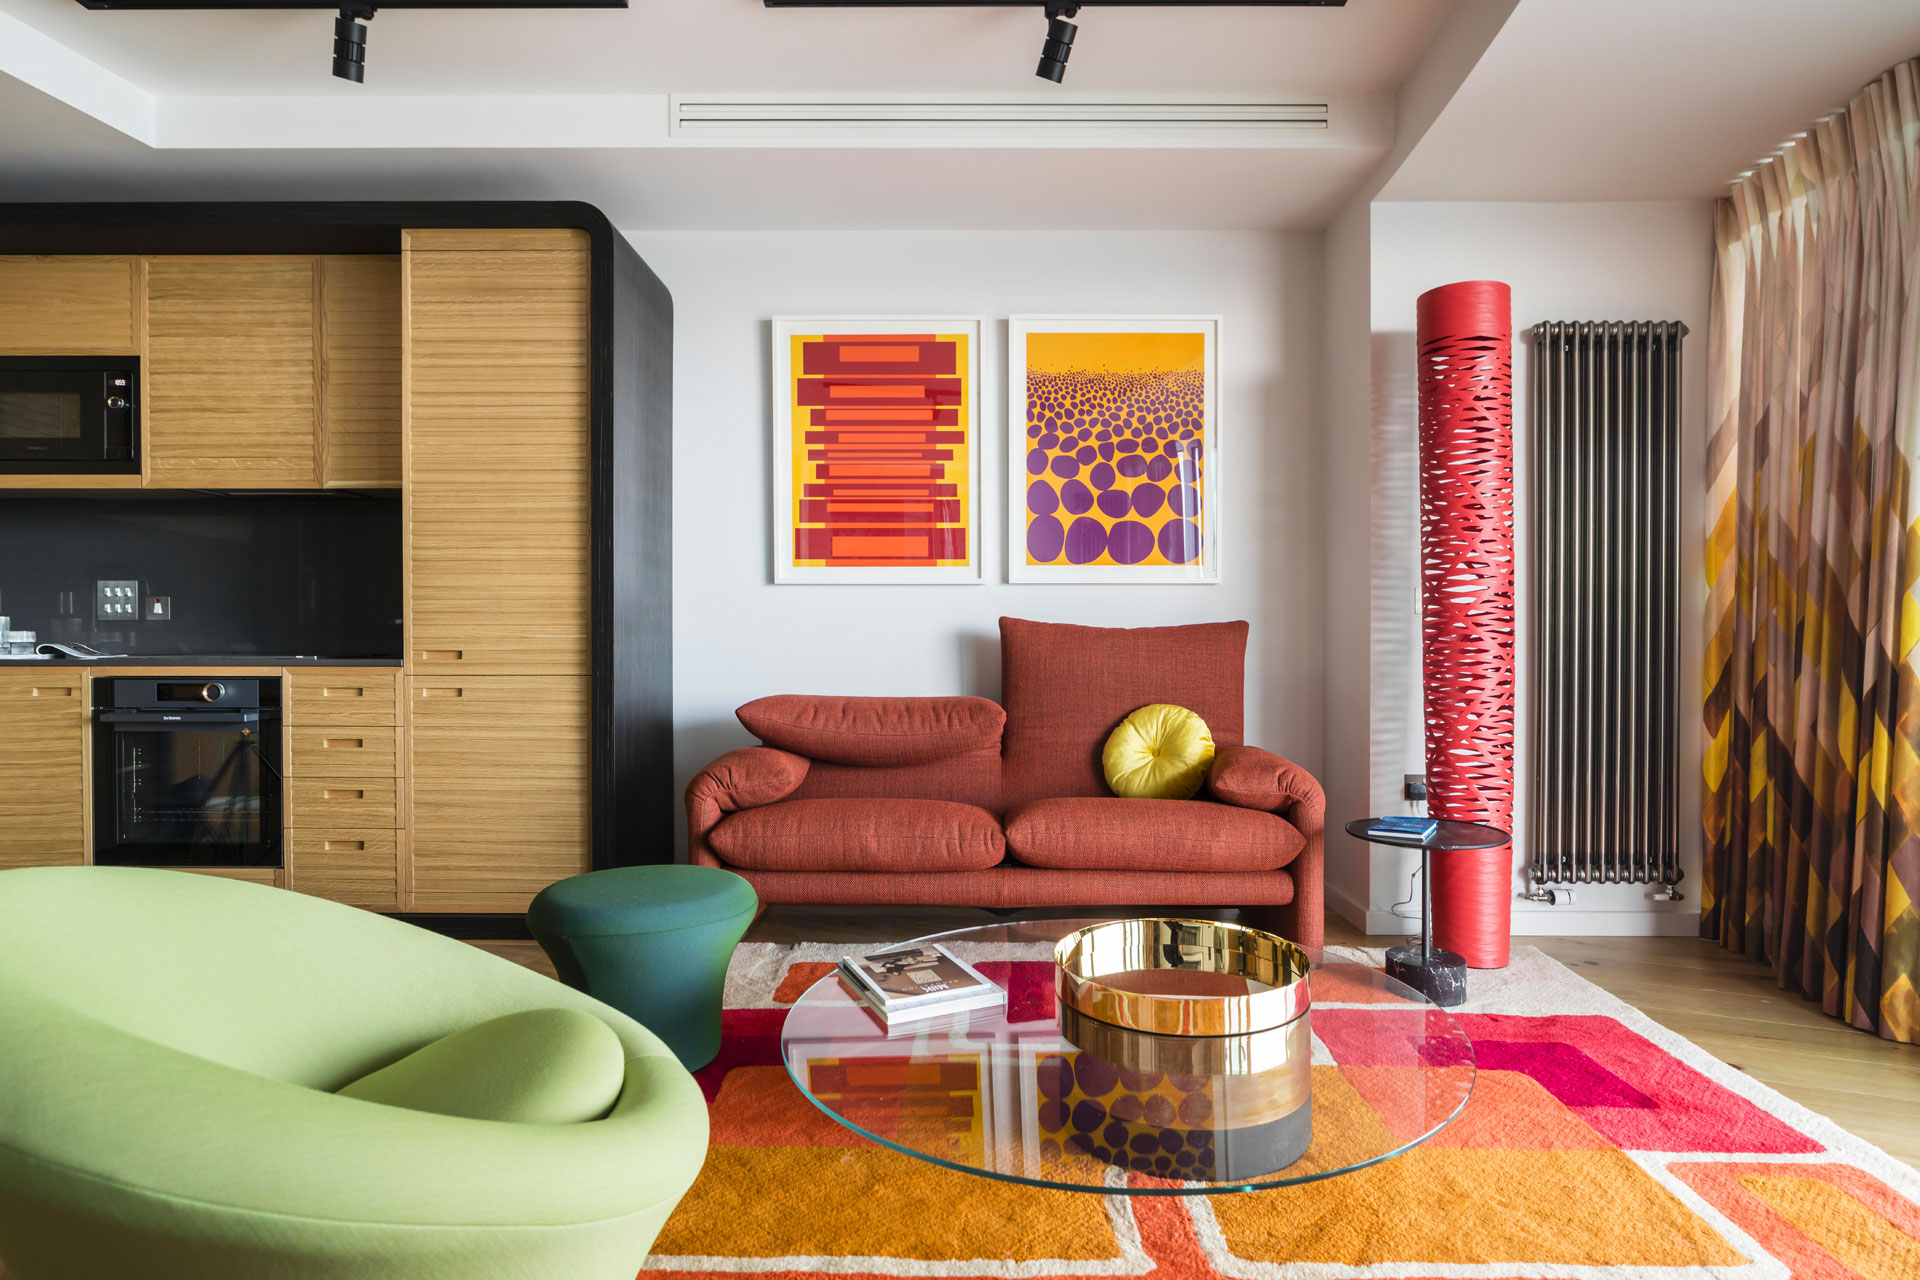 How Rabih Hage Designed A Spritzy, Retro-Inspired Canary Wharf Flat